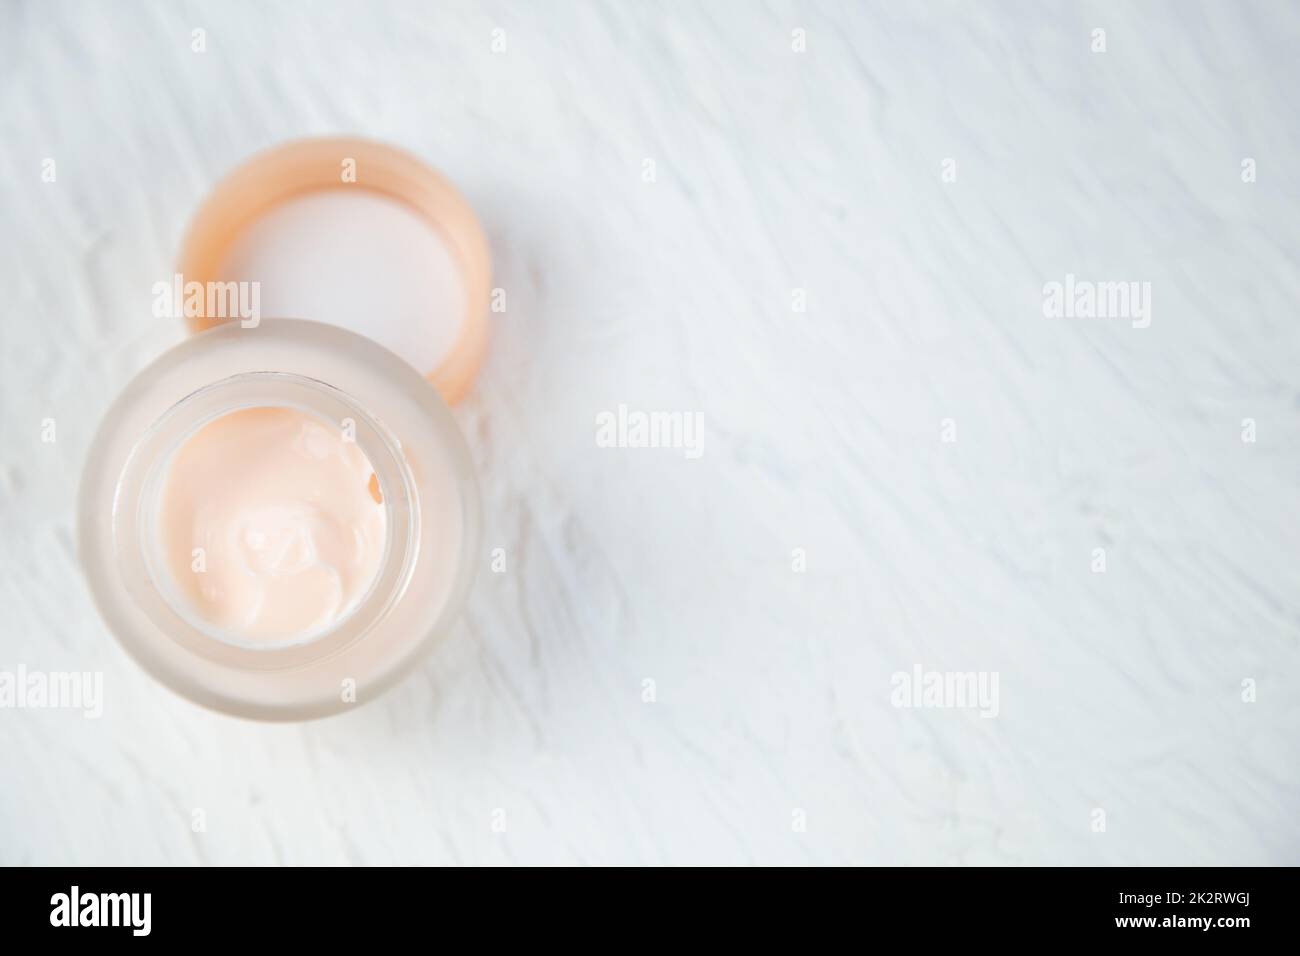 Cream of delicate peach color in a glass jar on a white textured background Stock Photo